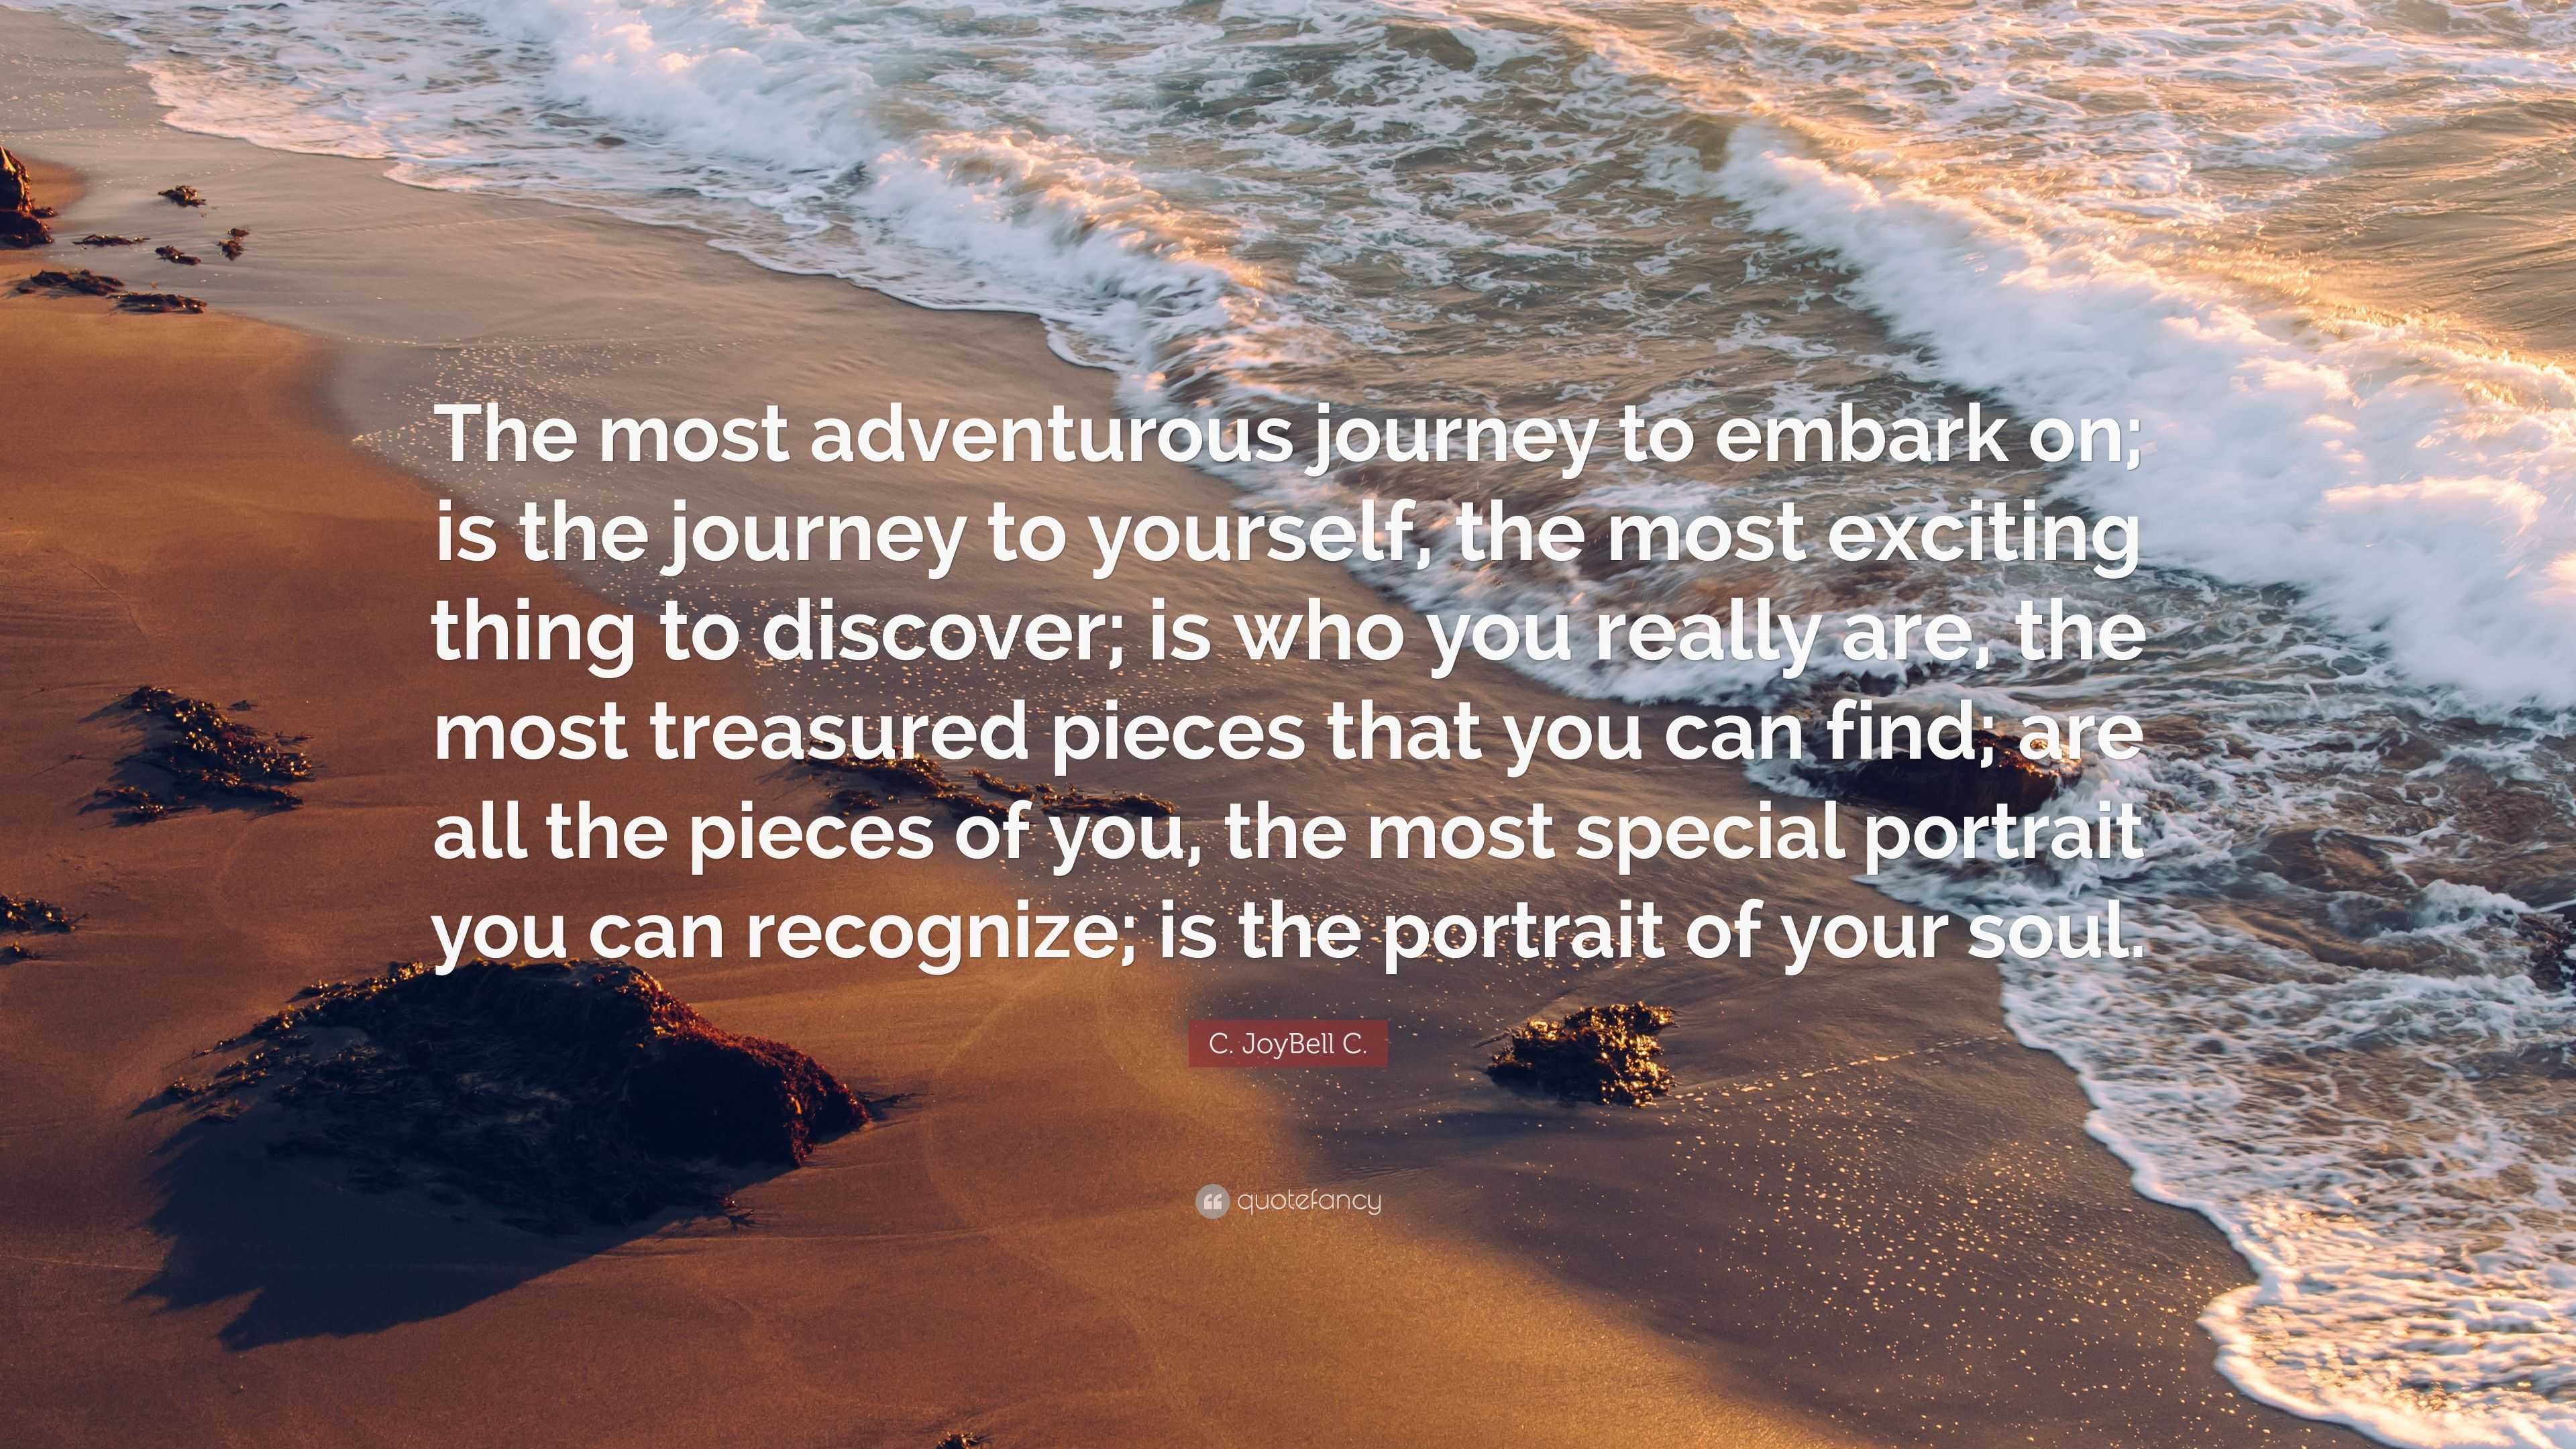 an adventurous journey meaning